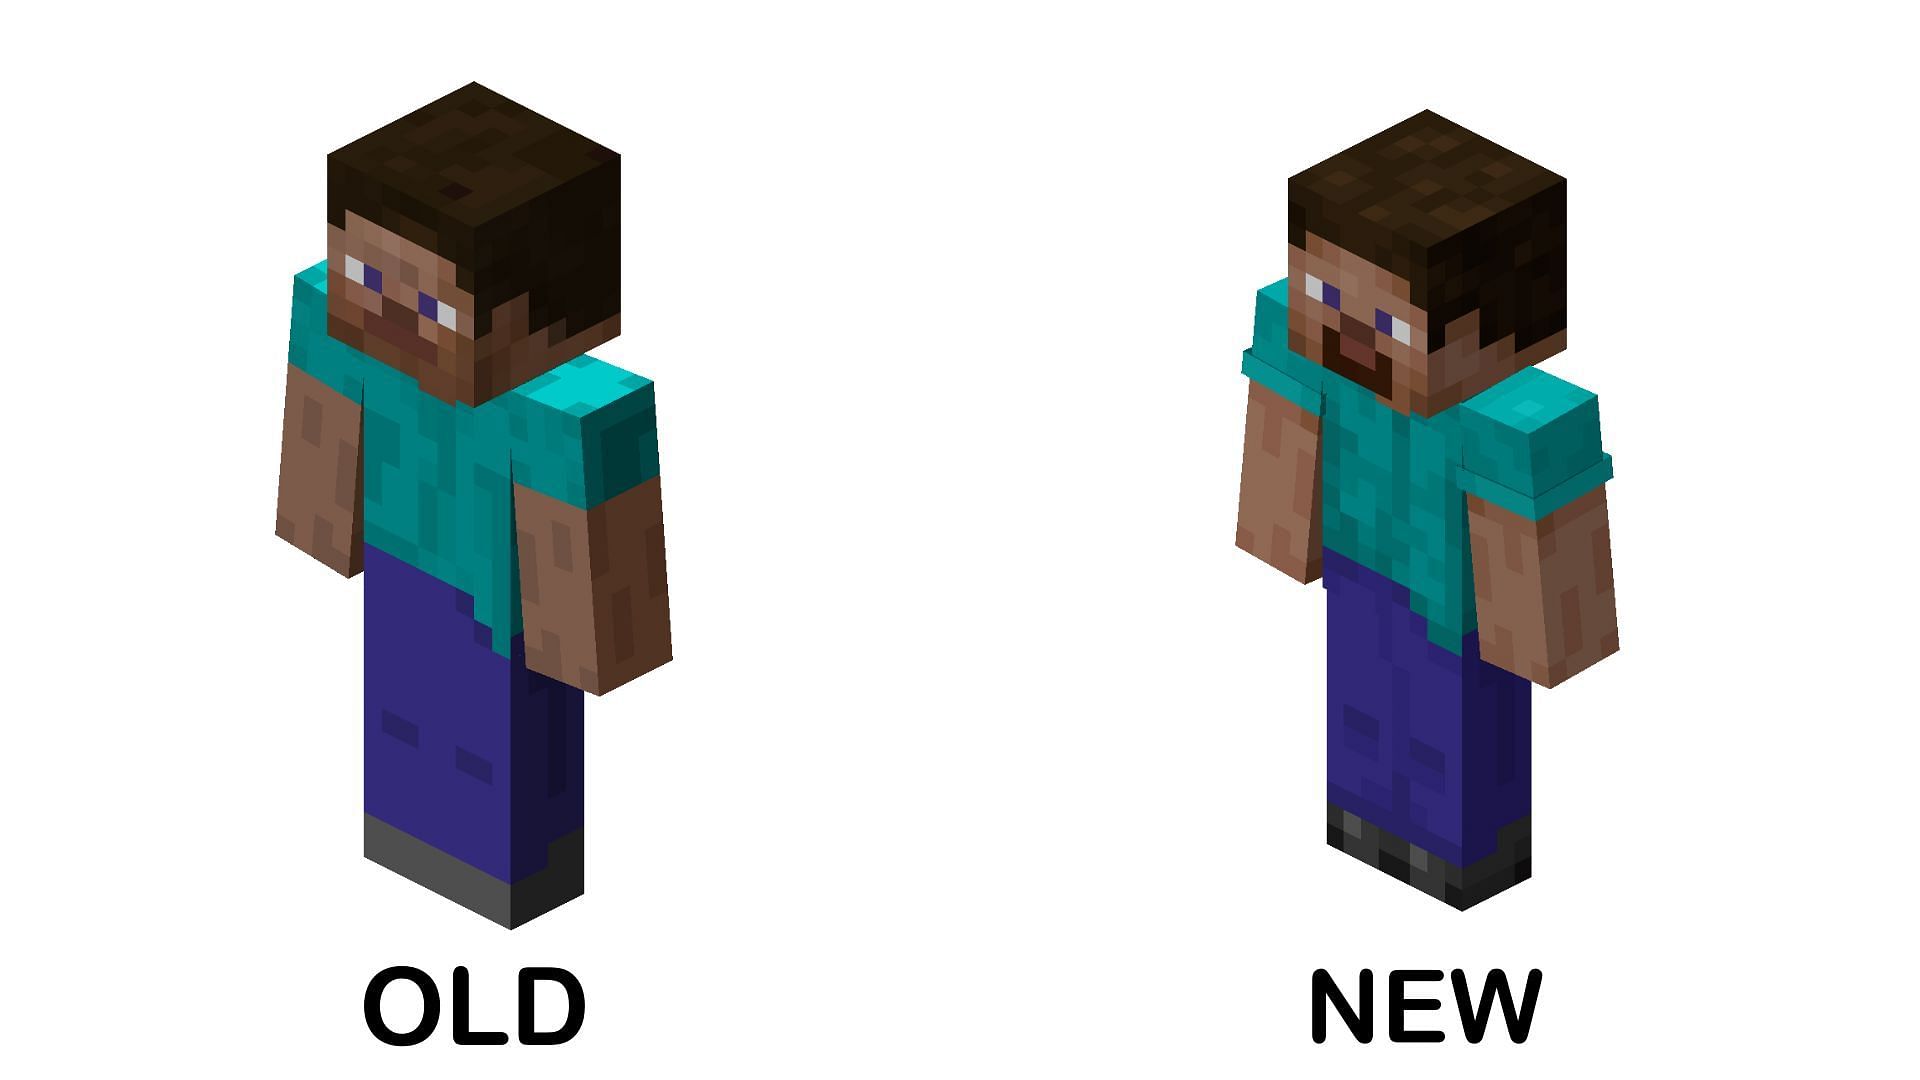 Major differences between old and new Steve skins are the 3D clothes, texture details, and beard (Image via Sporktseekda)